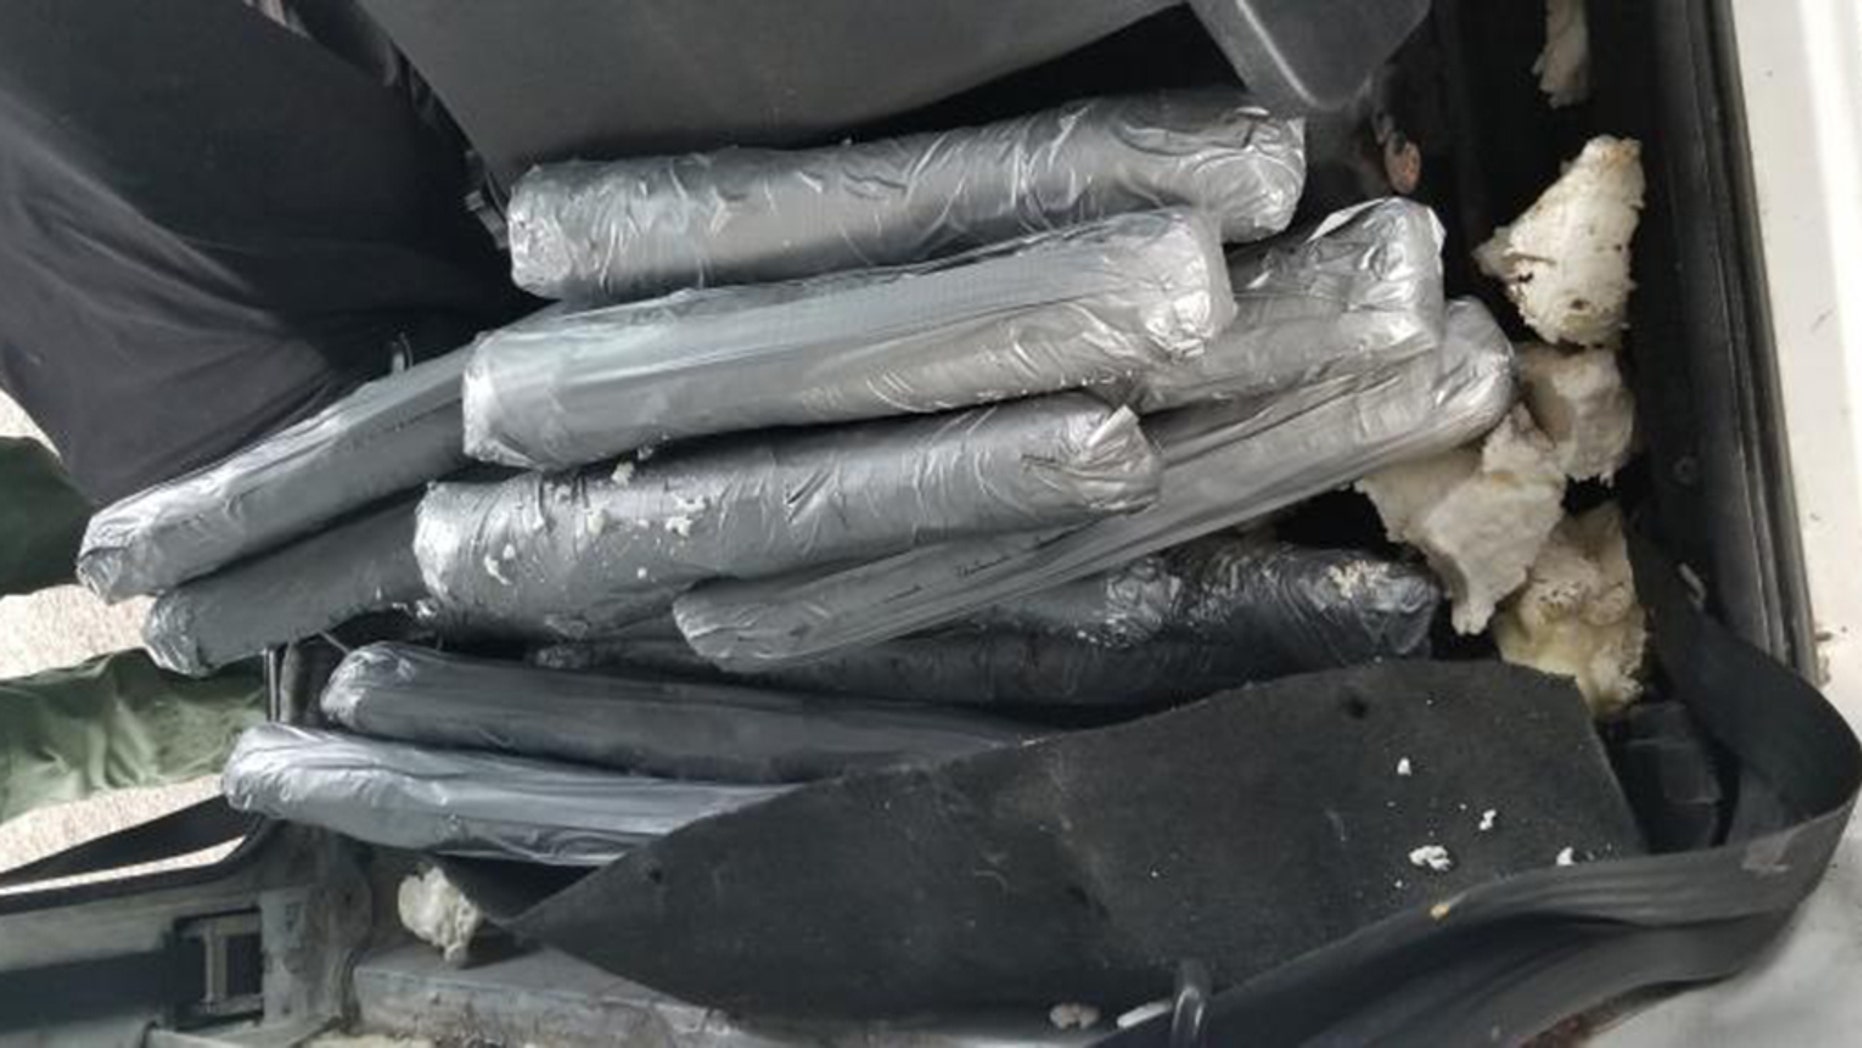 Border Patrol agents in Texas discovered more than a dozen bundles of methamphetamine in a pickup truck this week, believed to be worth more than $1.4 million, officials said Tuesday.